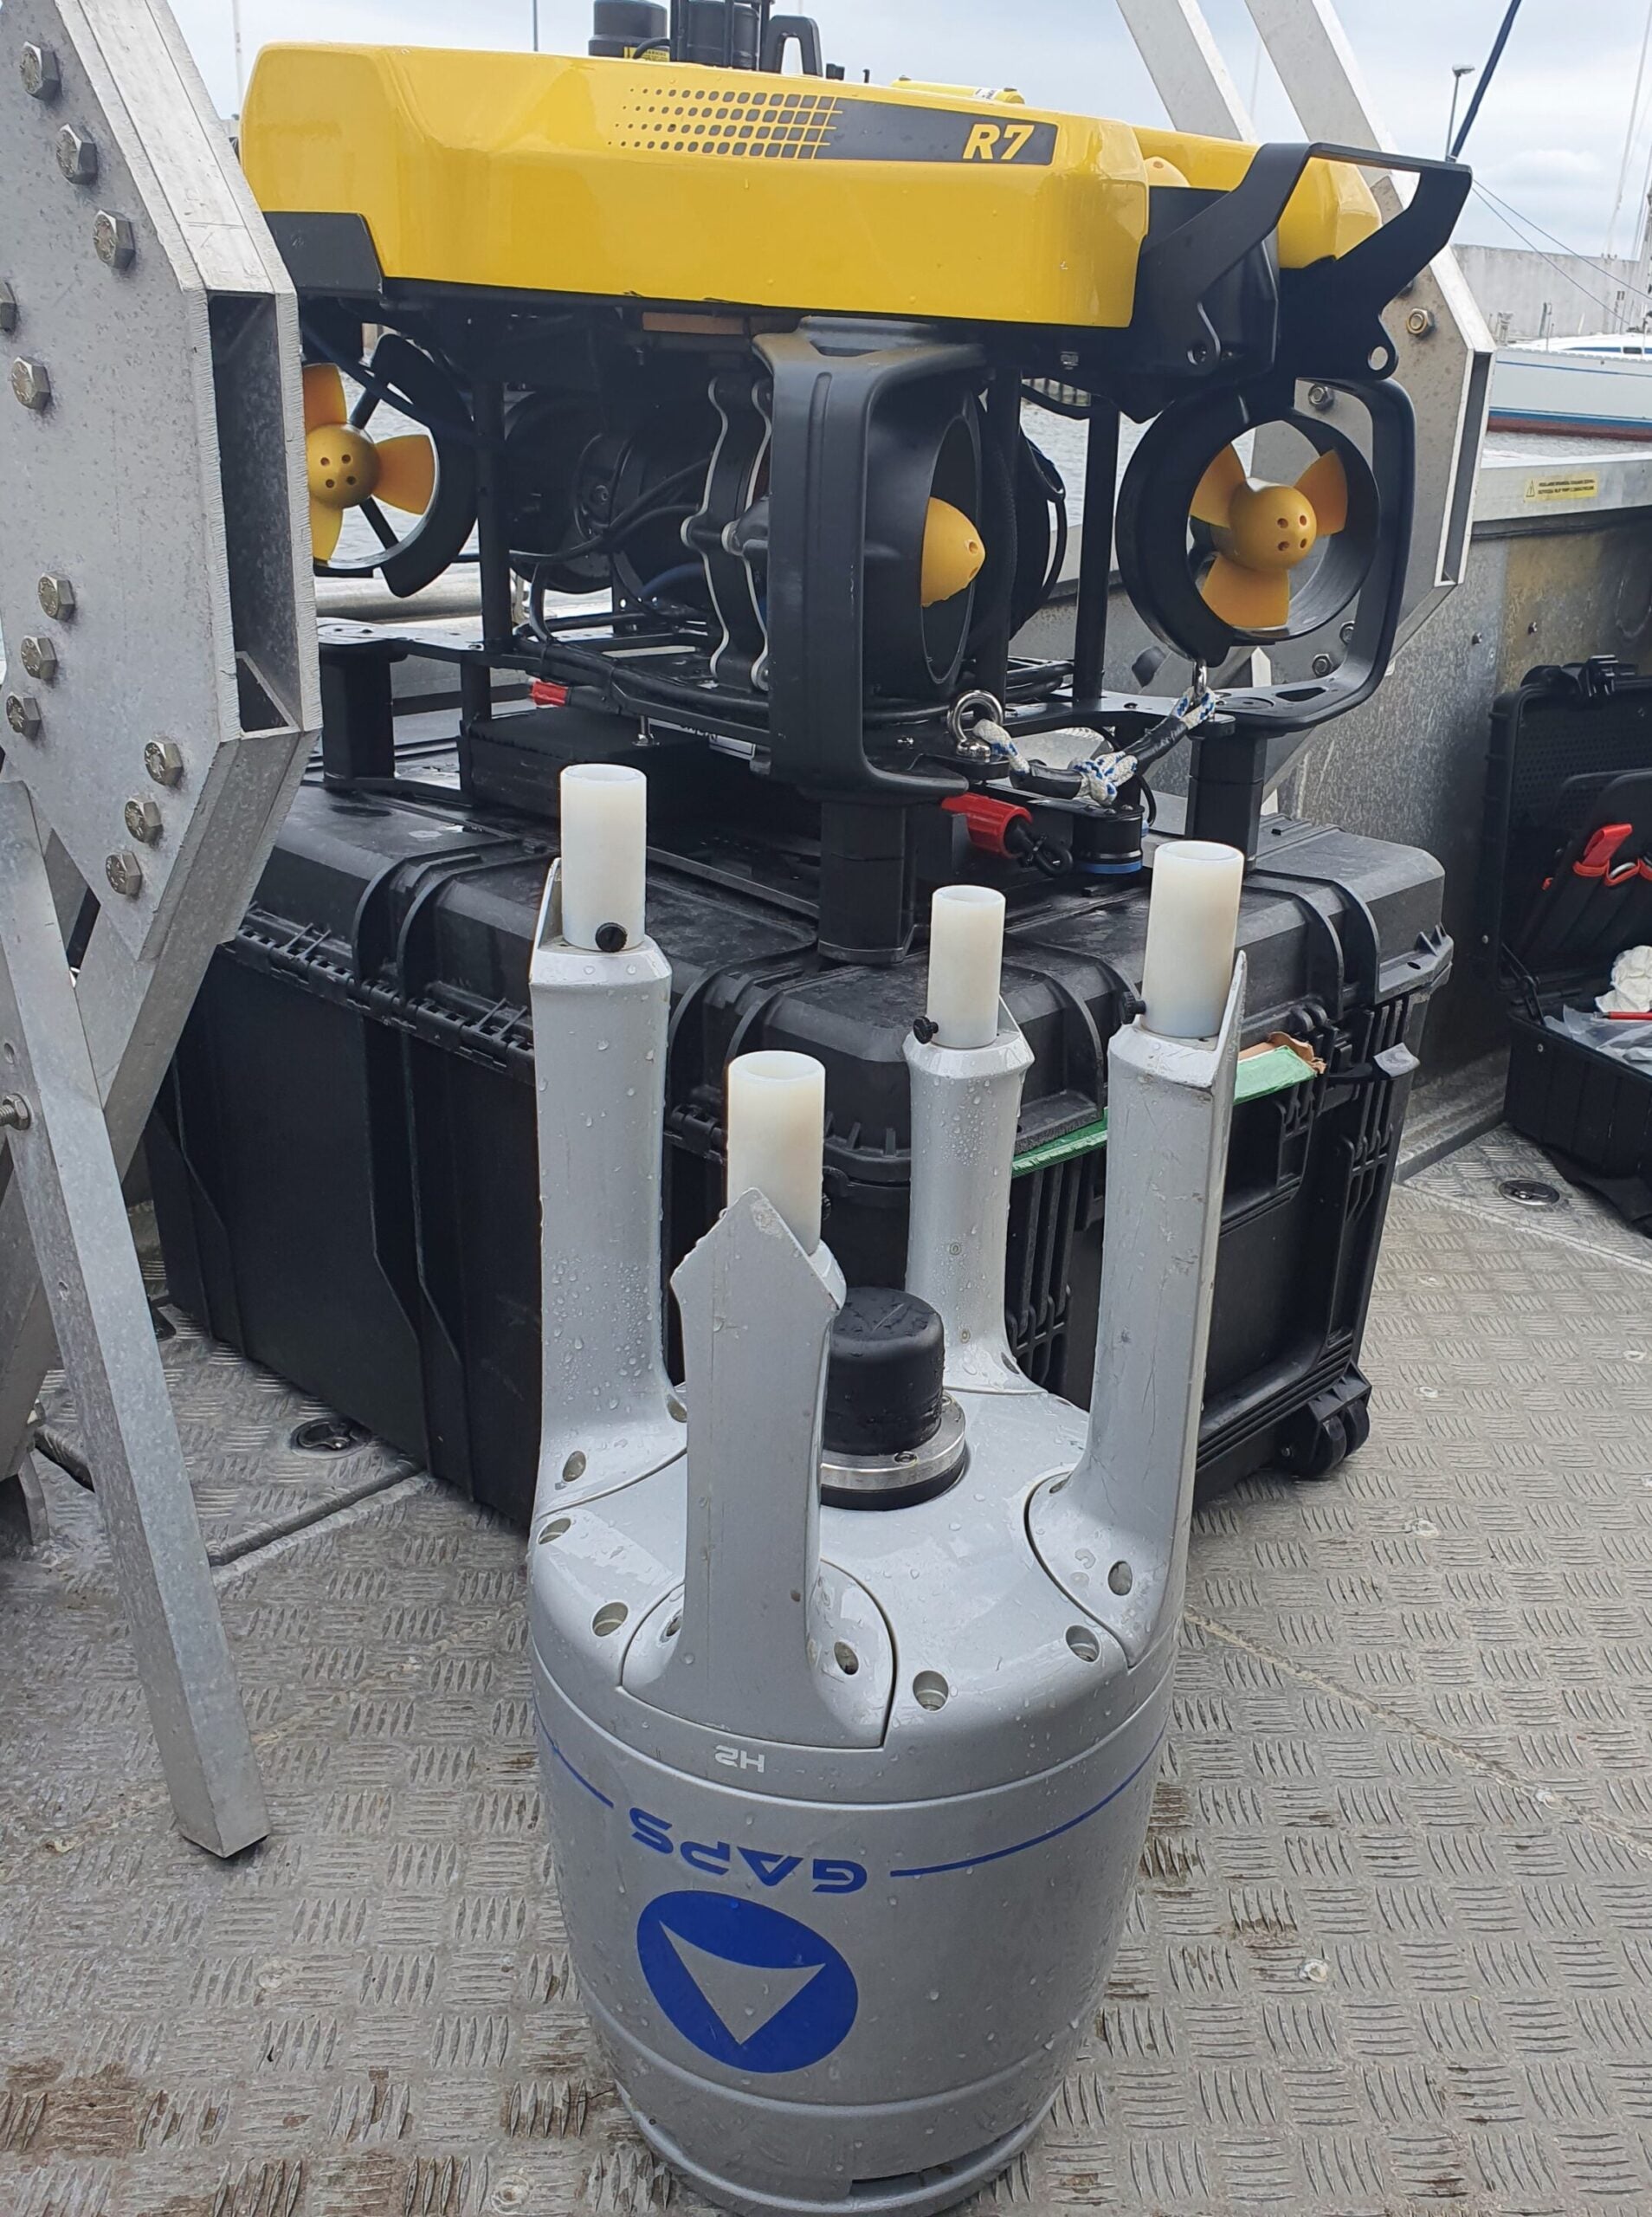 iXblue, ECA systems demonstrate subsea asset tracking in shallow water